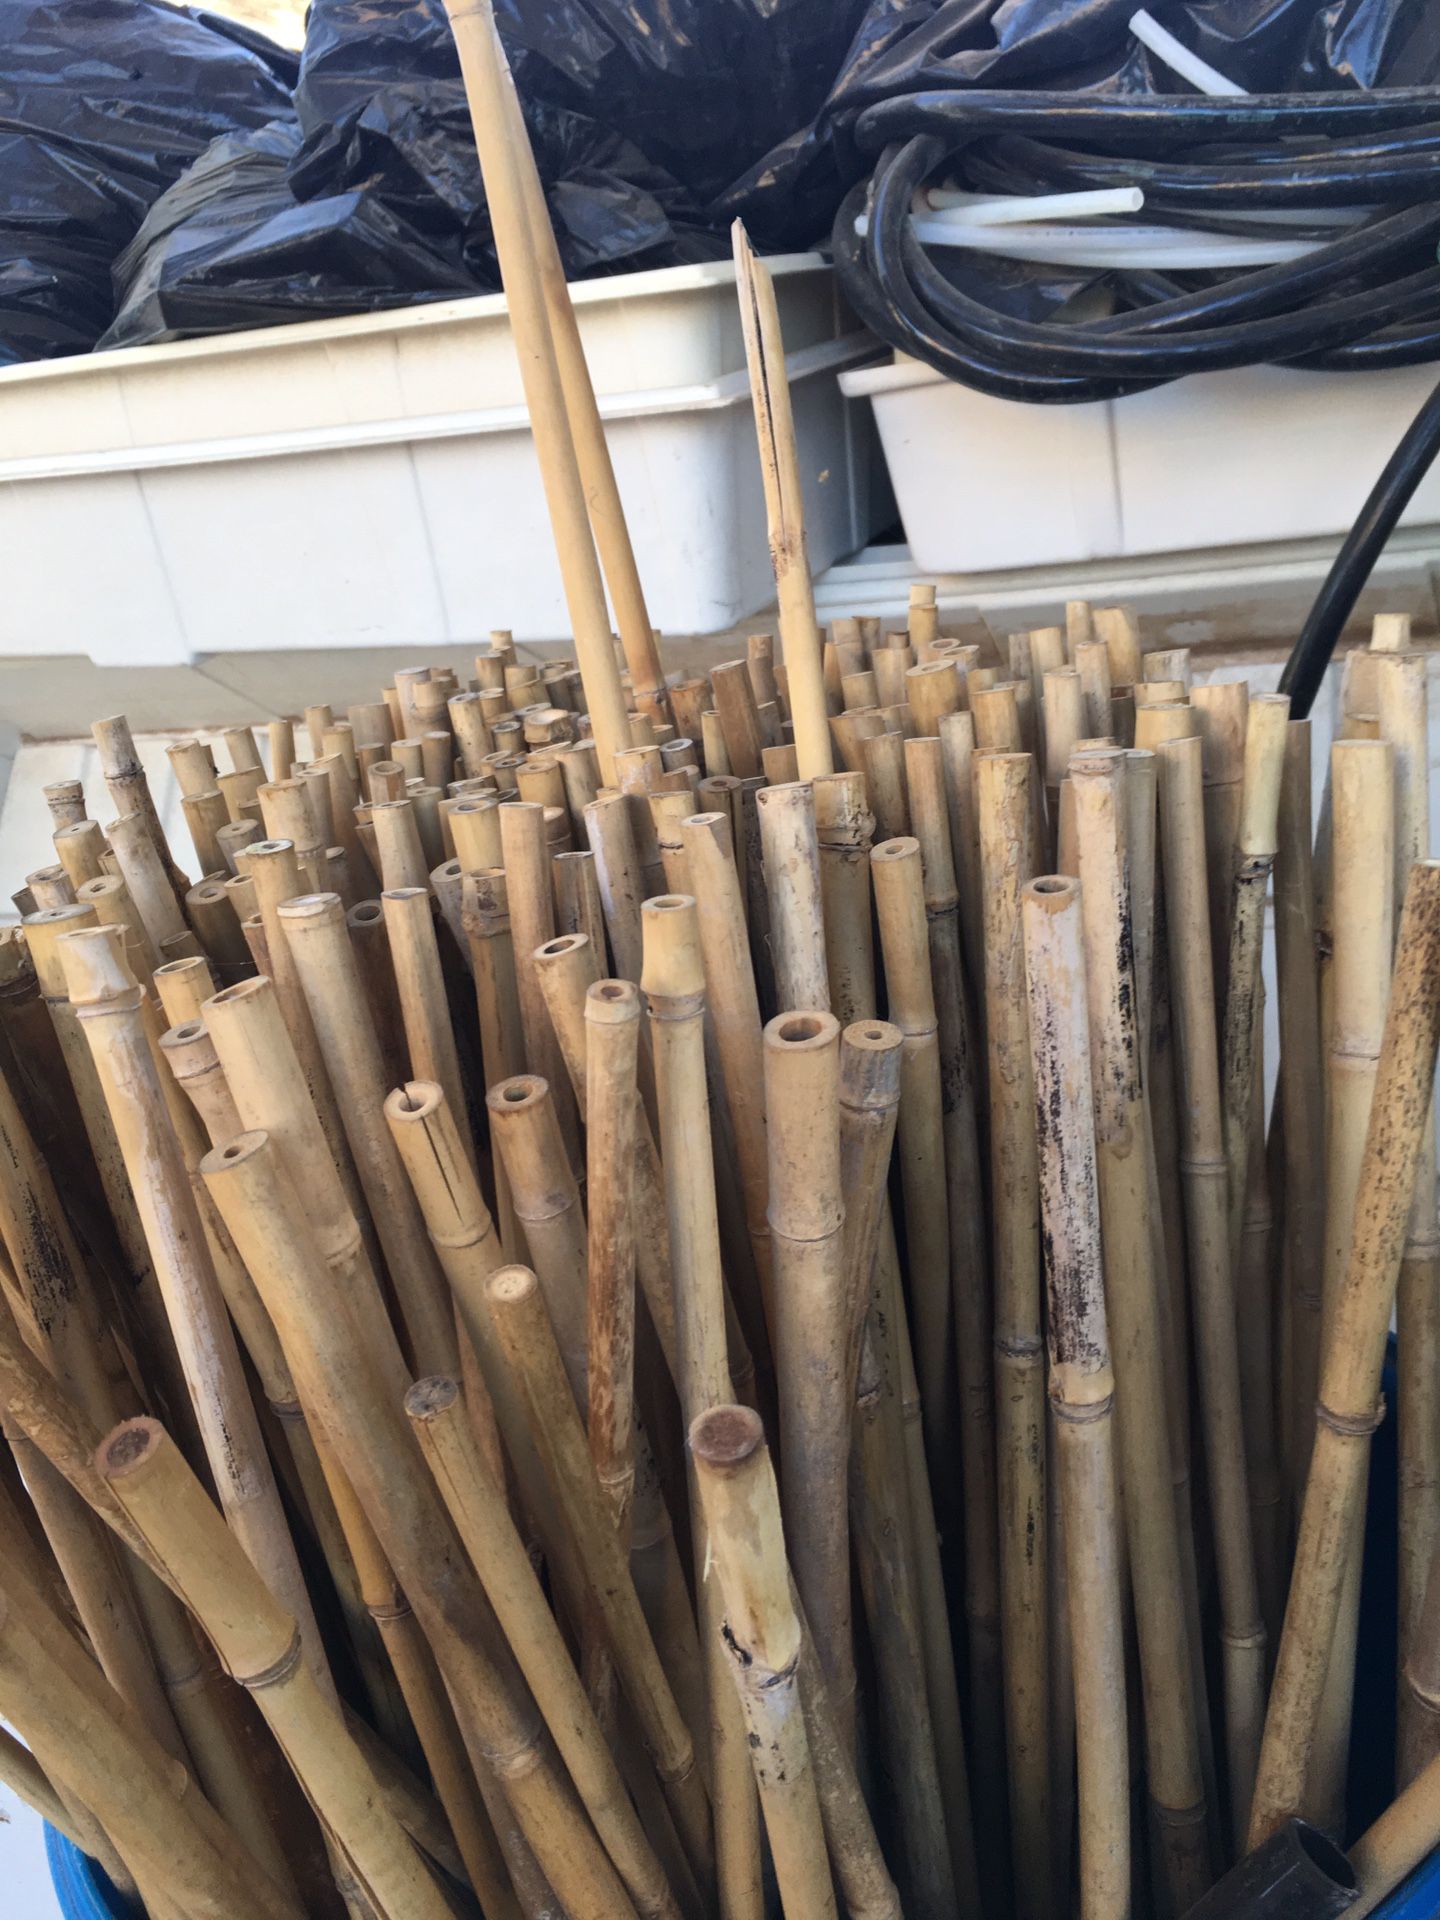 2 bundles of heavy duty plant stakes 4’